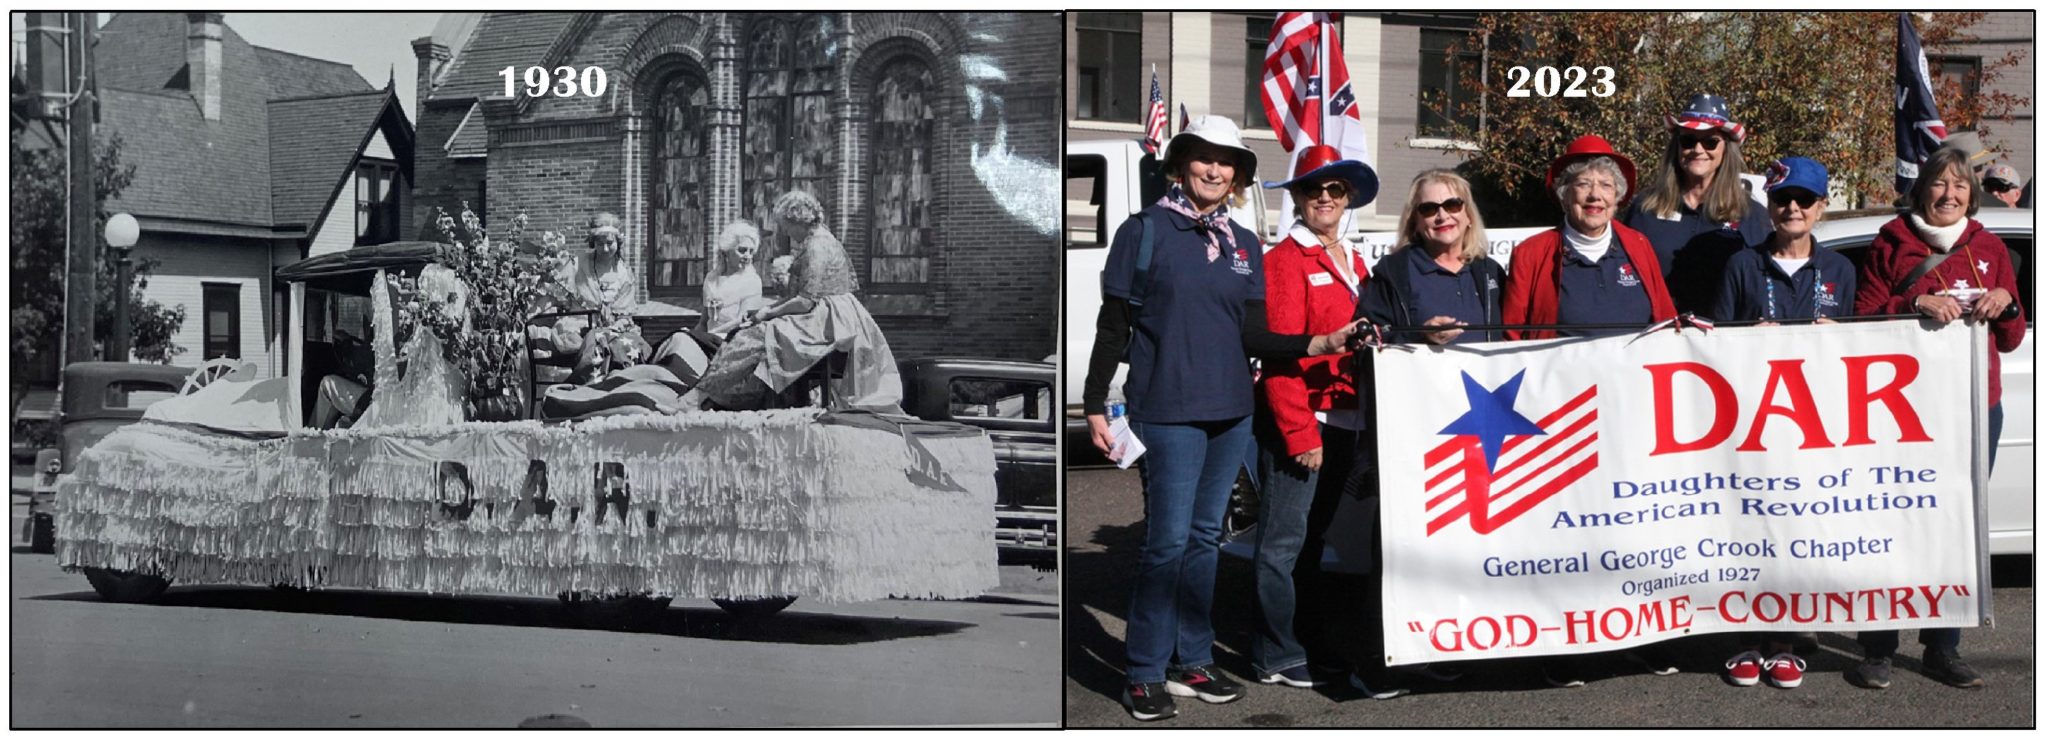 These two photos show the General George Crook Chapter, NSDAR, on a parade float in 1930 and the chapter marching in a parade in 2023. Photo courtesy of Sharlot Hall Museum Library & Archives/DAR collection.